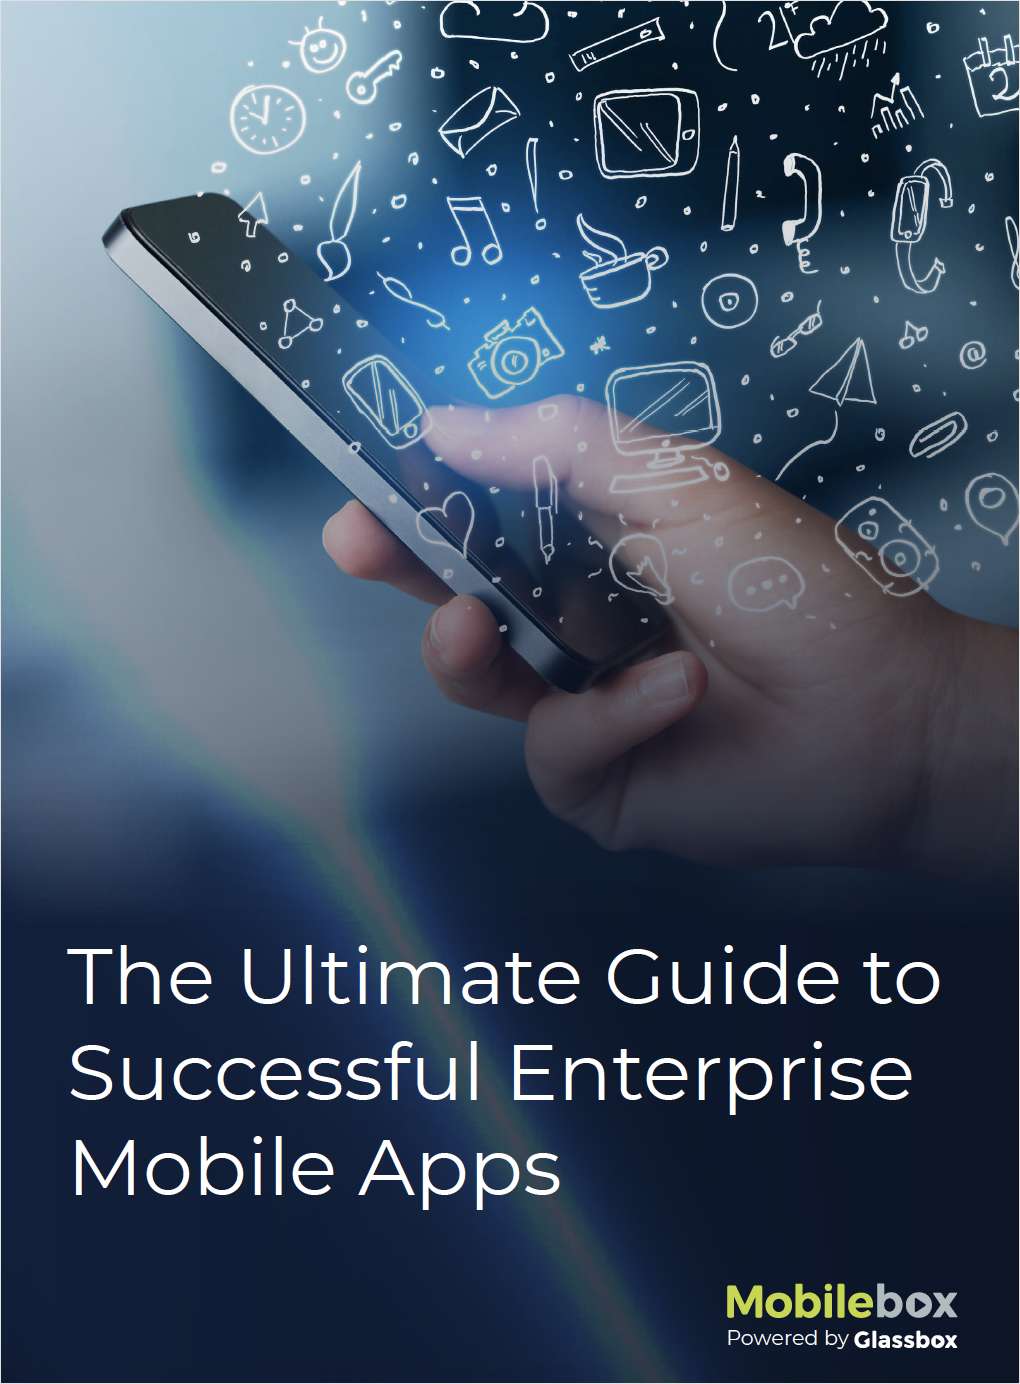 The Ultimate Guide to Successful Enterprise Mobile Apps